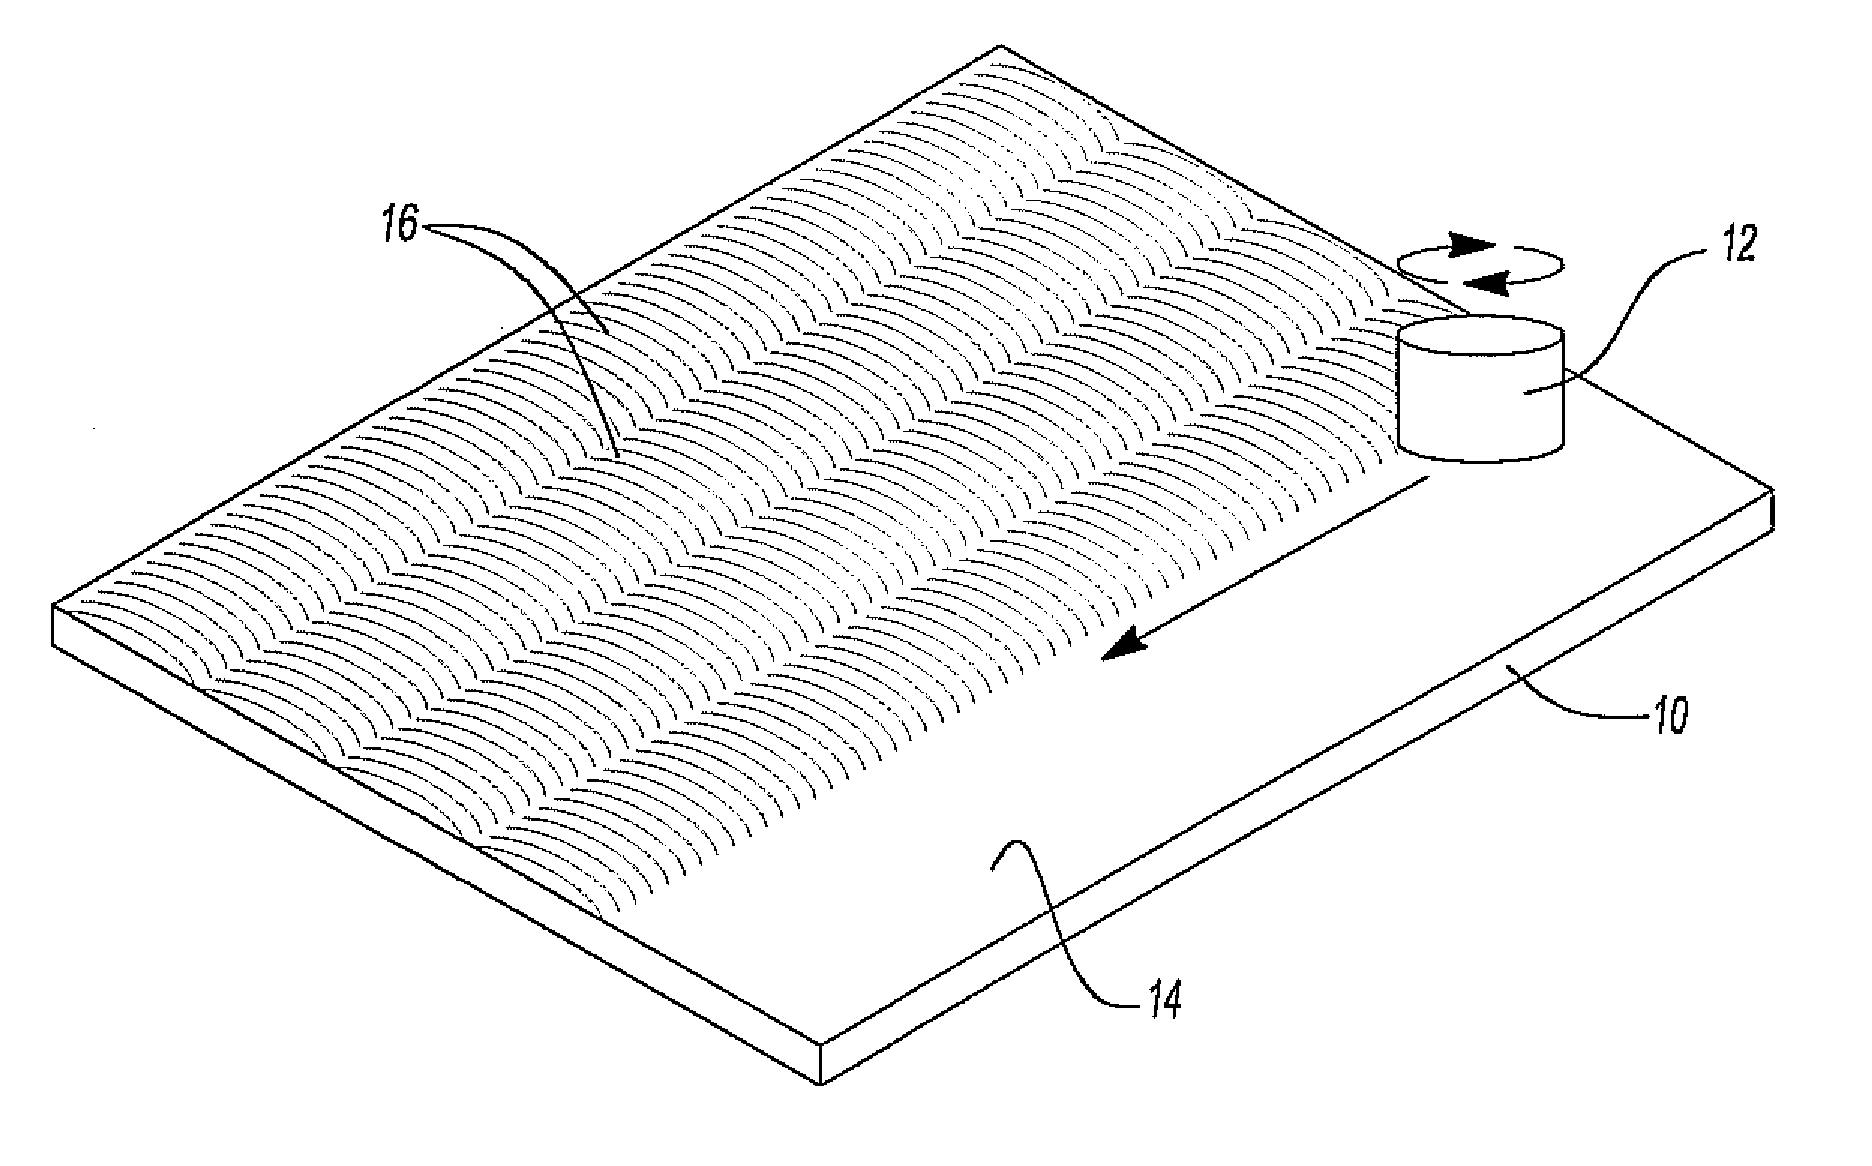 Method for developing fine grained, thermally stable metallic material